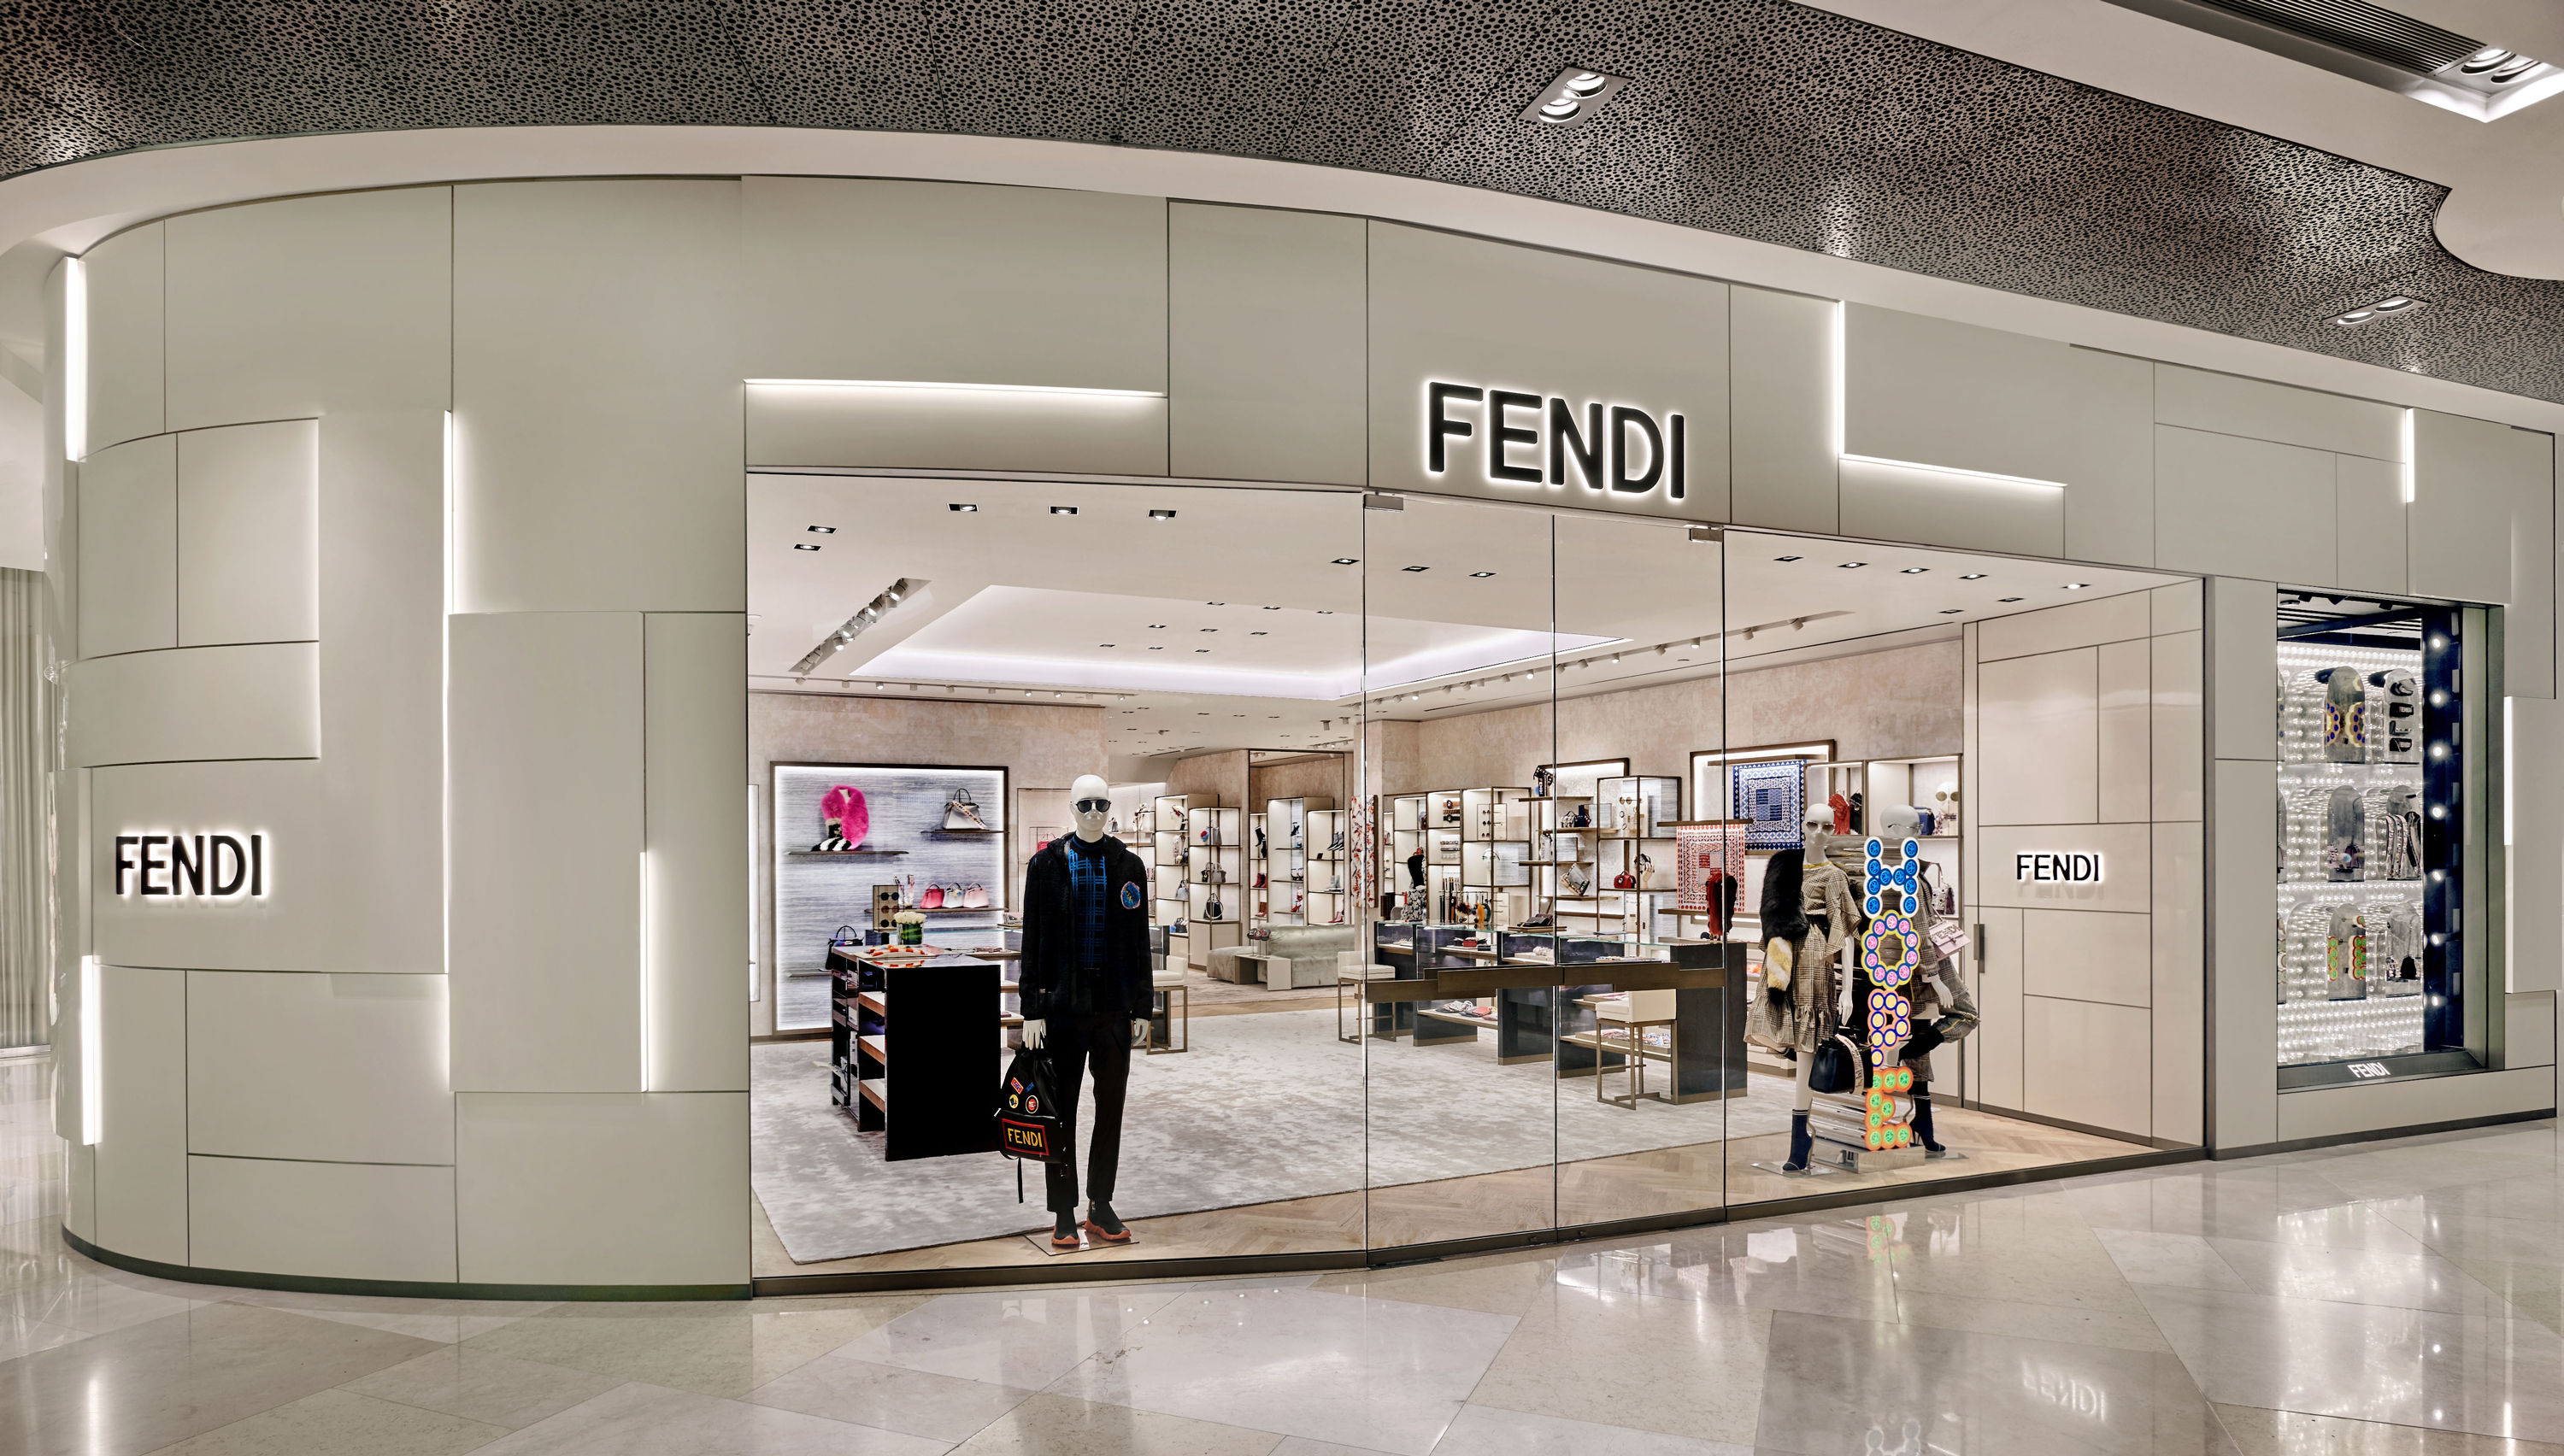 Store explore: Fendi reveals its new Ion Orchard boutique and the Fendi Kiosk pop-up